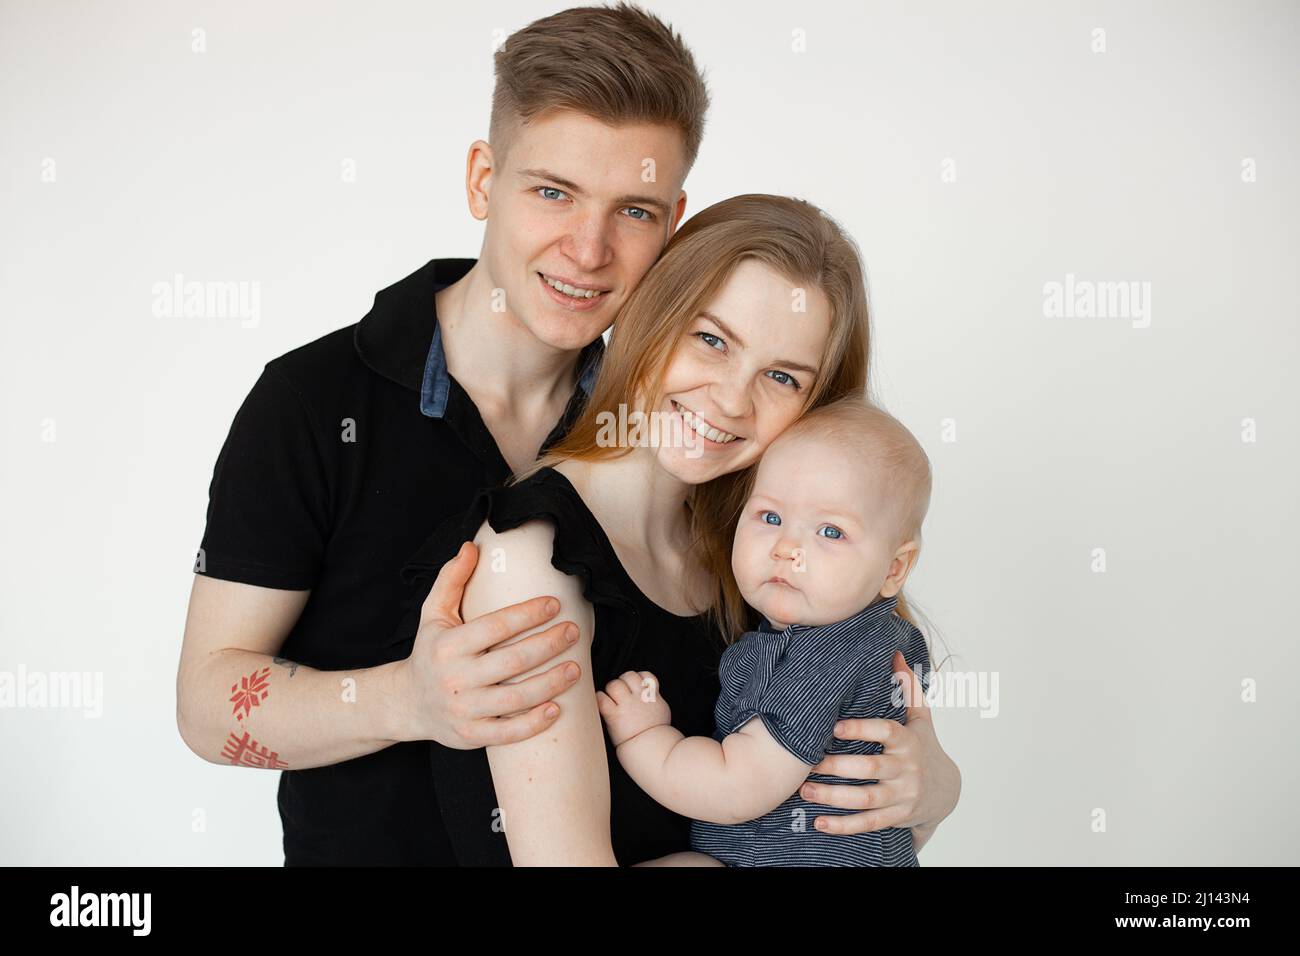 Studio shot portrait of glad spouses, parents, family, man with tattoo on arm, woman, child. Bounding goals. Close up Stock Photo